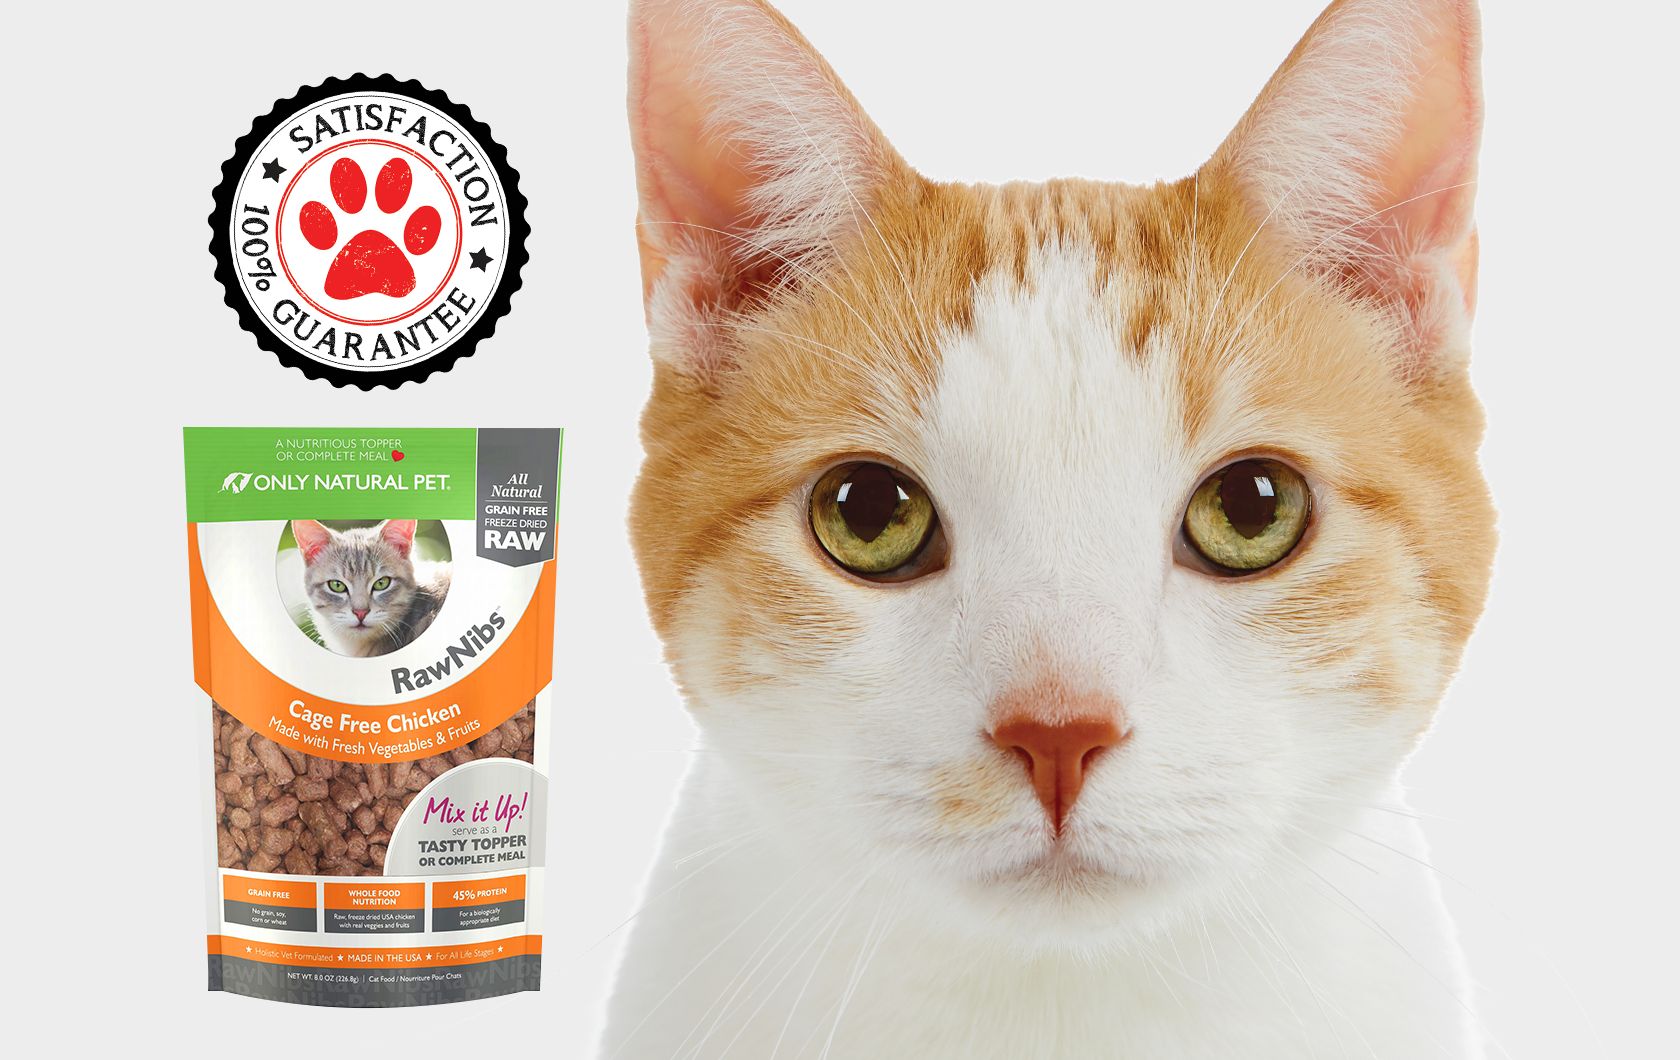 Spectacle Syge person Ejendomsret Only Natural Pet® Cat & Kitten Food & Care Products | PetSmart